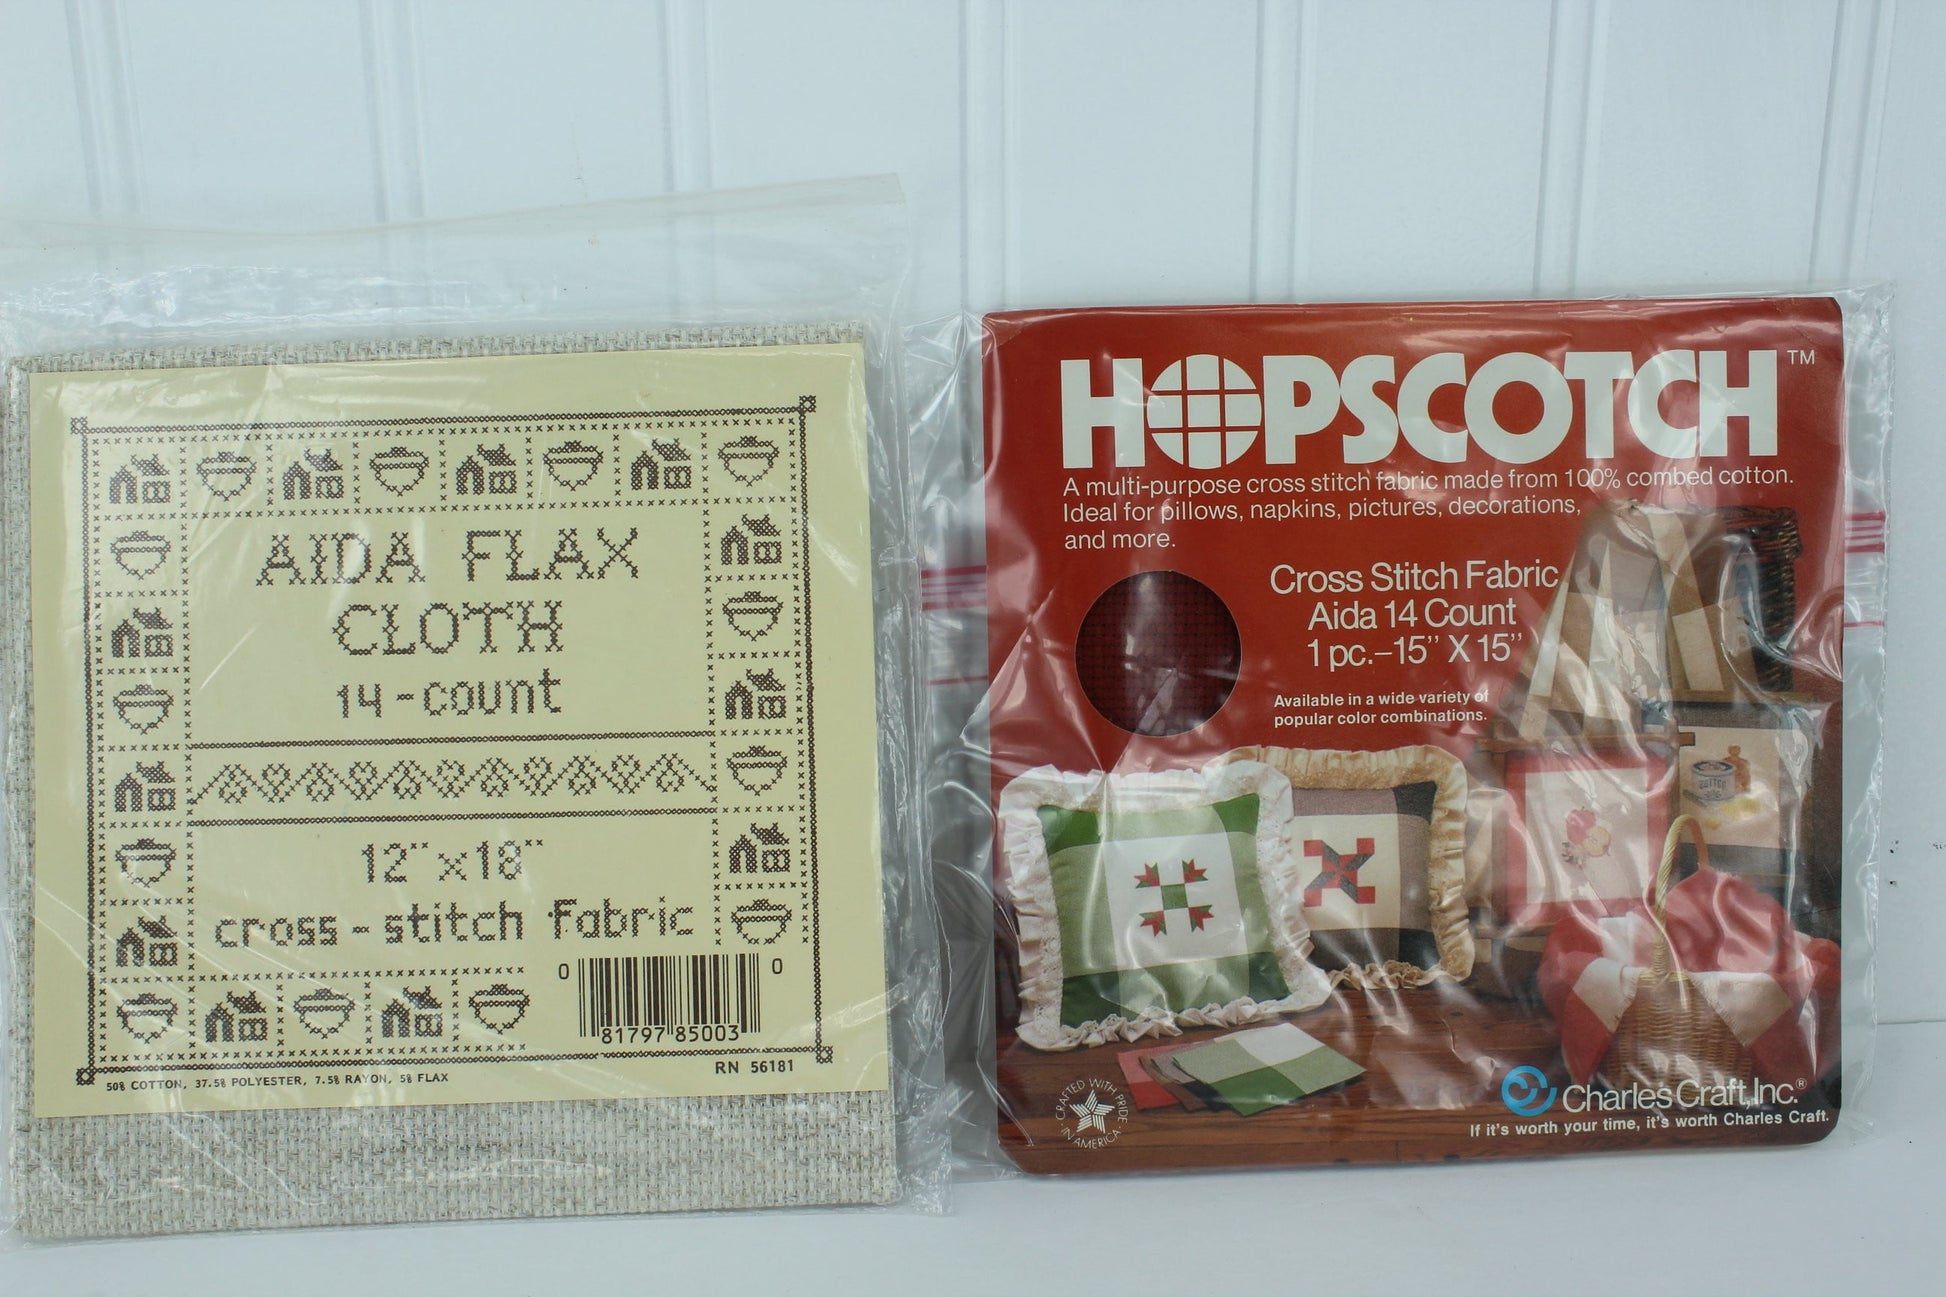 Cross Stitch Fabric Aida Flax Natural & Hopscotch Deep Red Ivory pillow with borders pattern